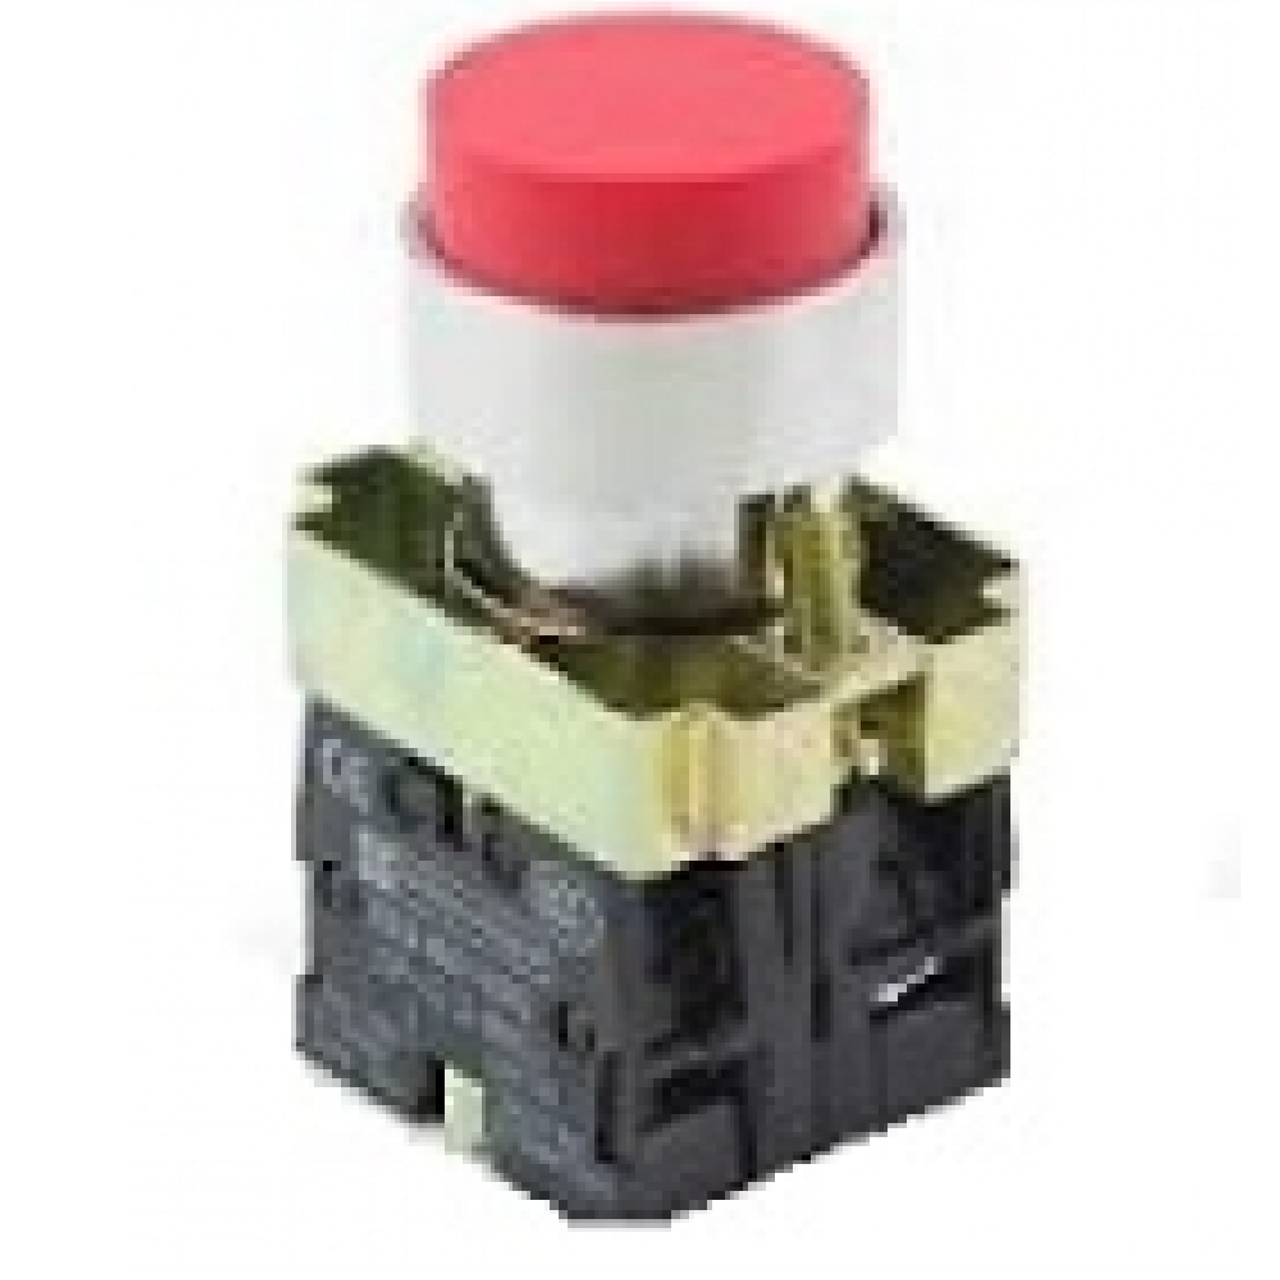 General Electric GE CR104PBL11R1S2 Illuminated Pushbutton, Full Voltage, 1 NO/NC [New]